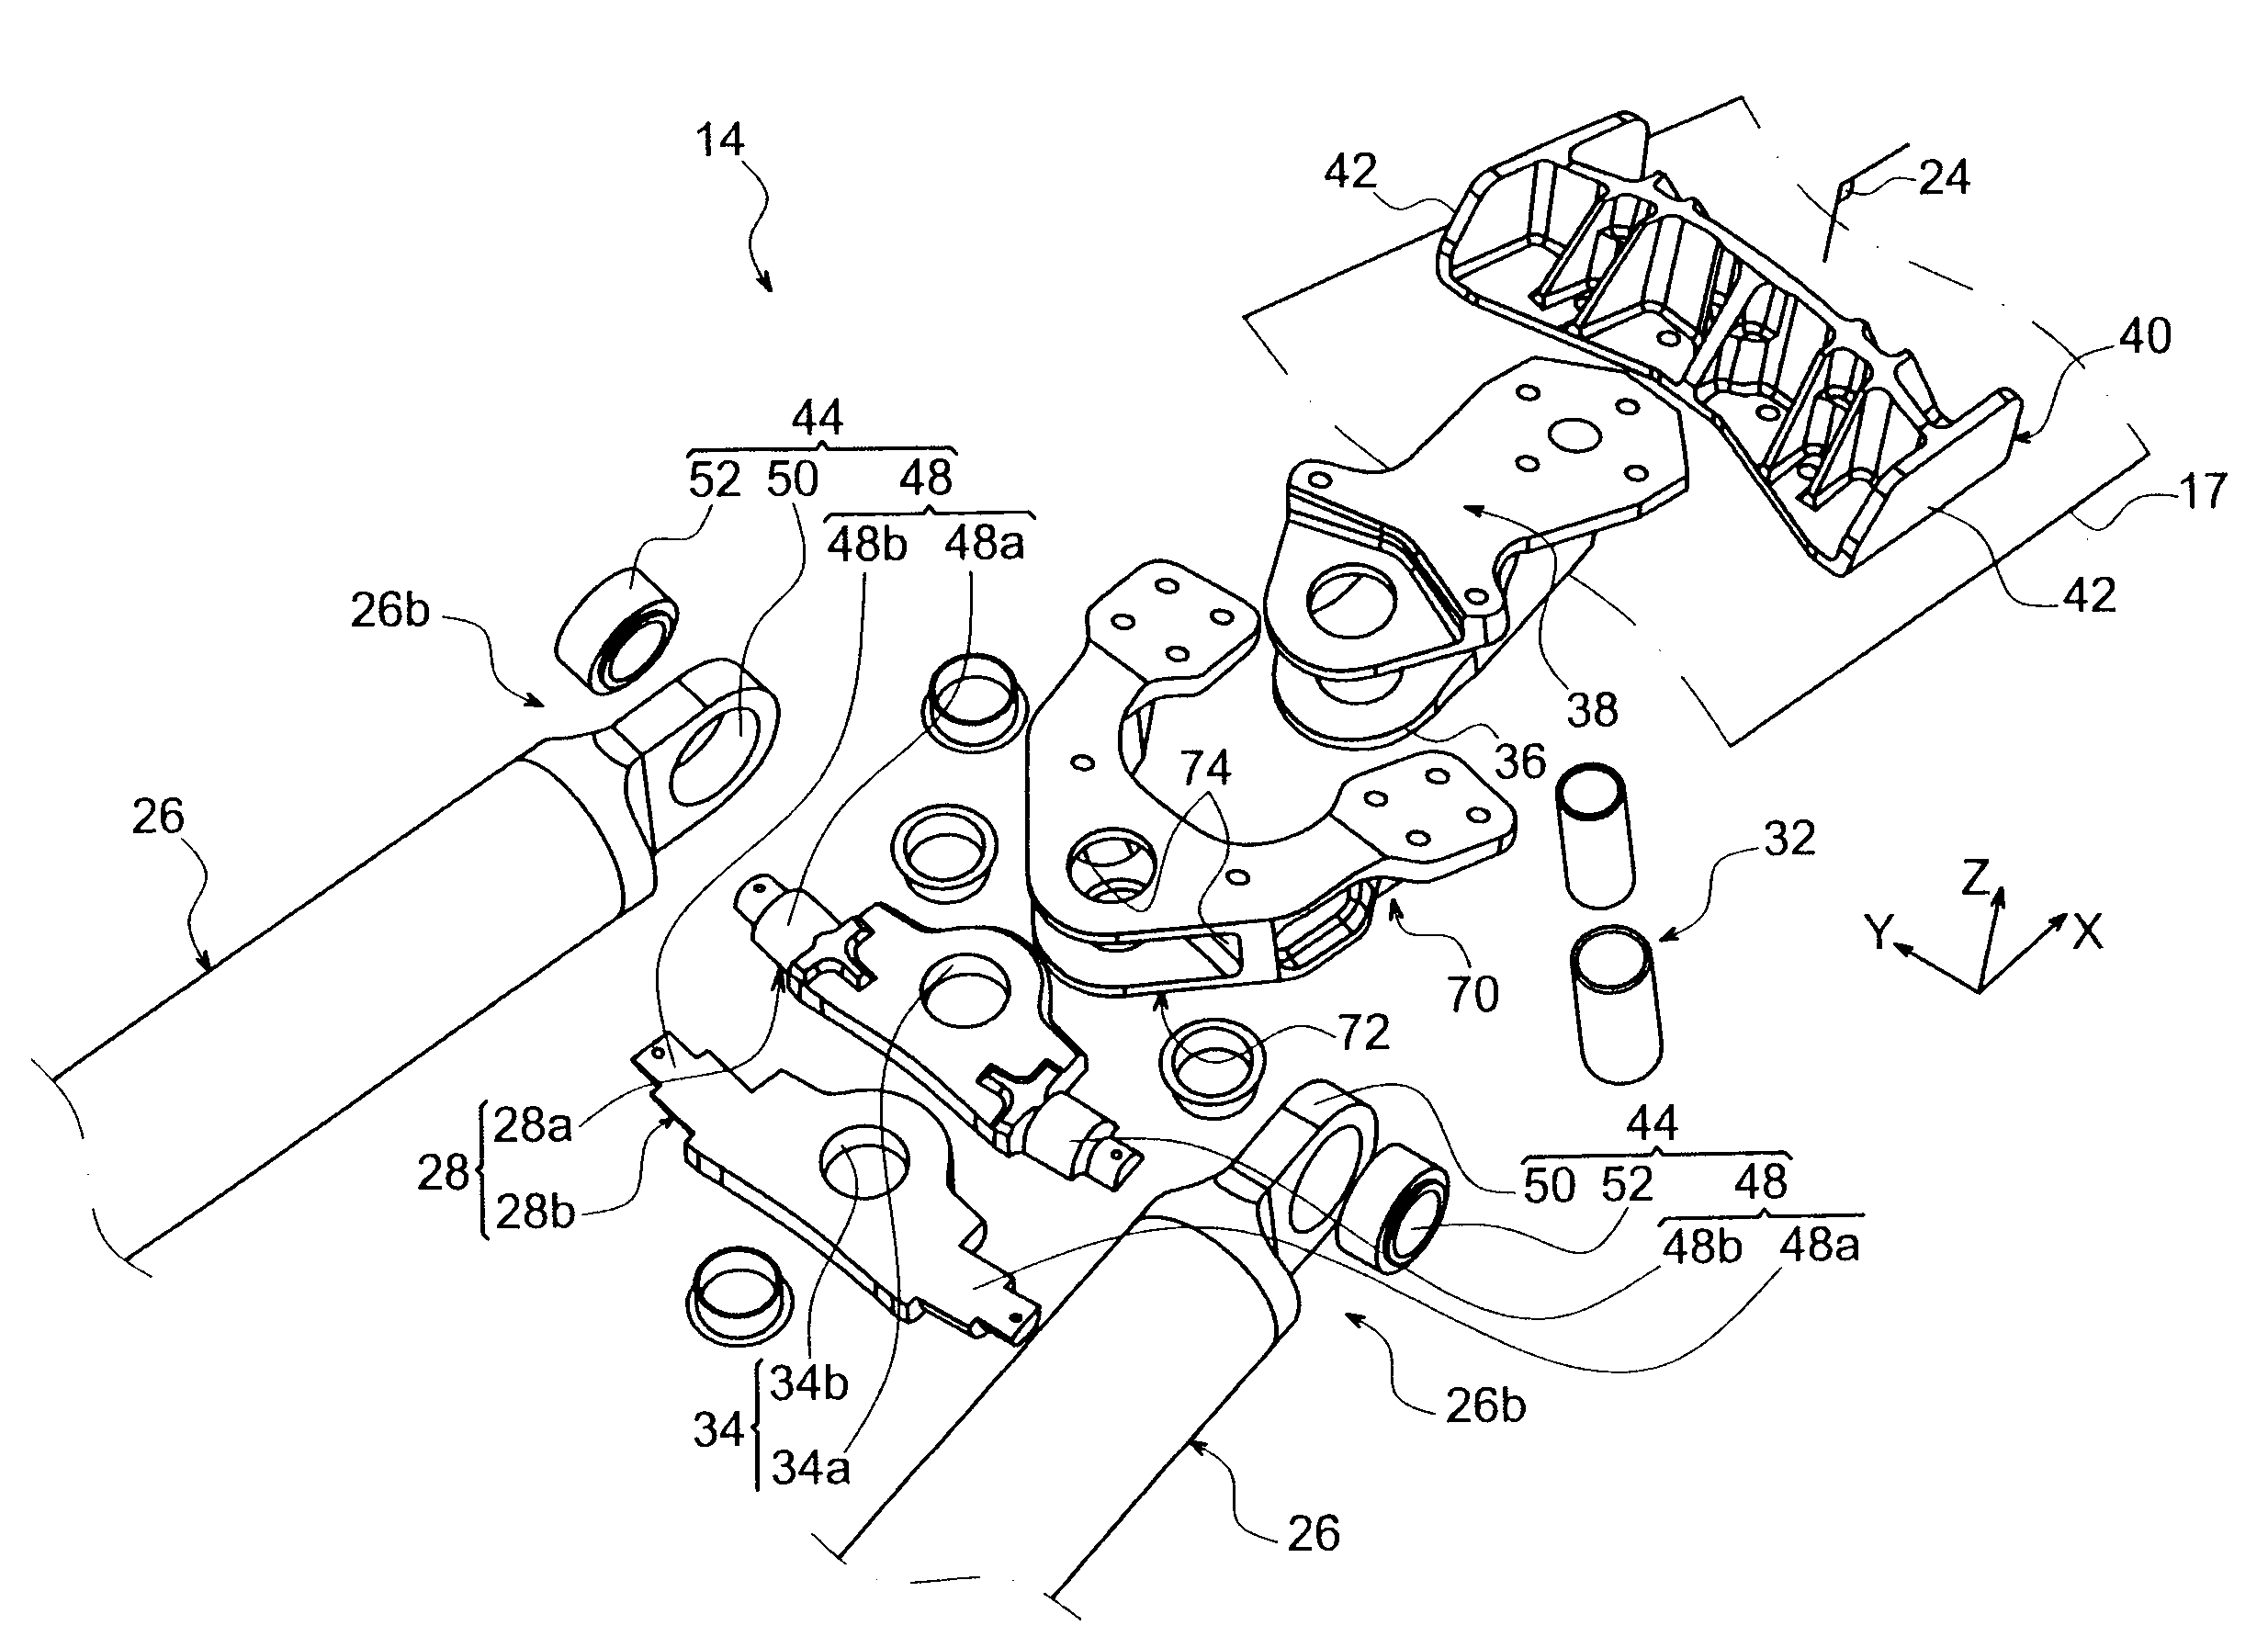 Aircraft engine attachment device comprising two thrust-reaching link rods that fit together transversely